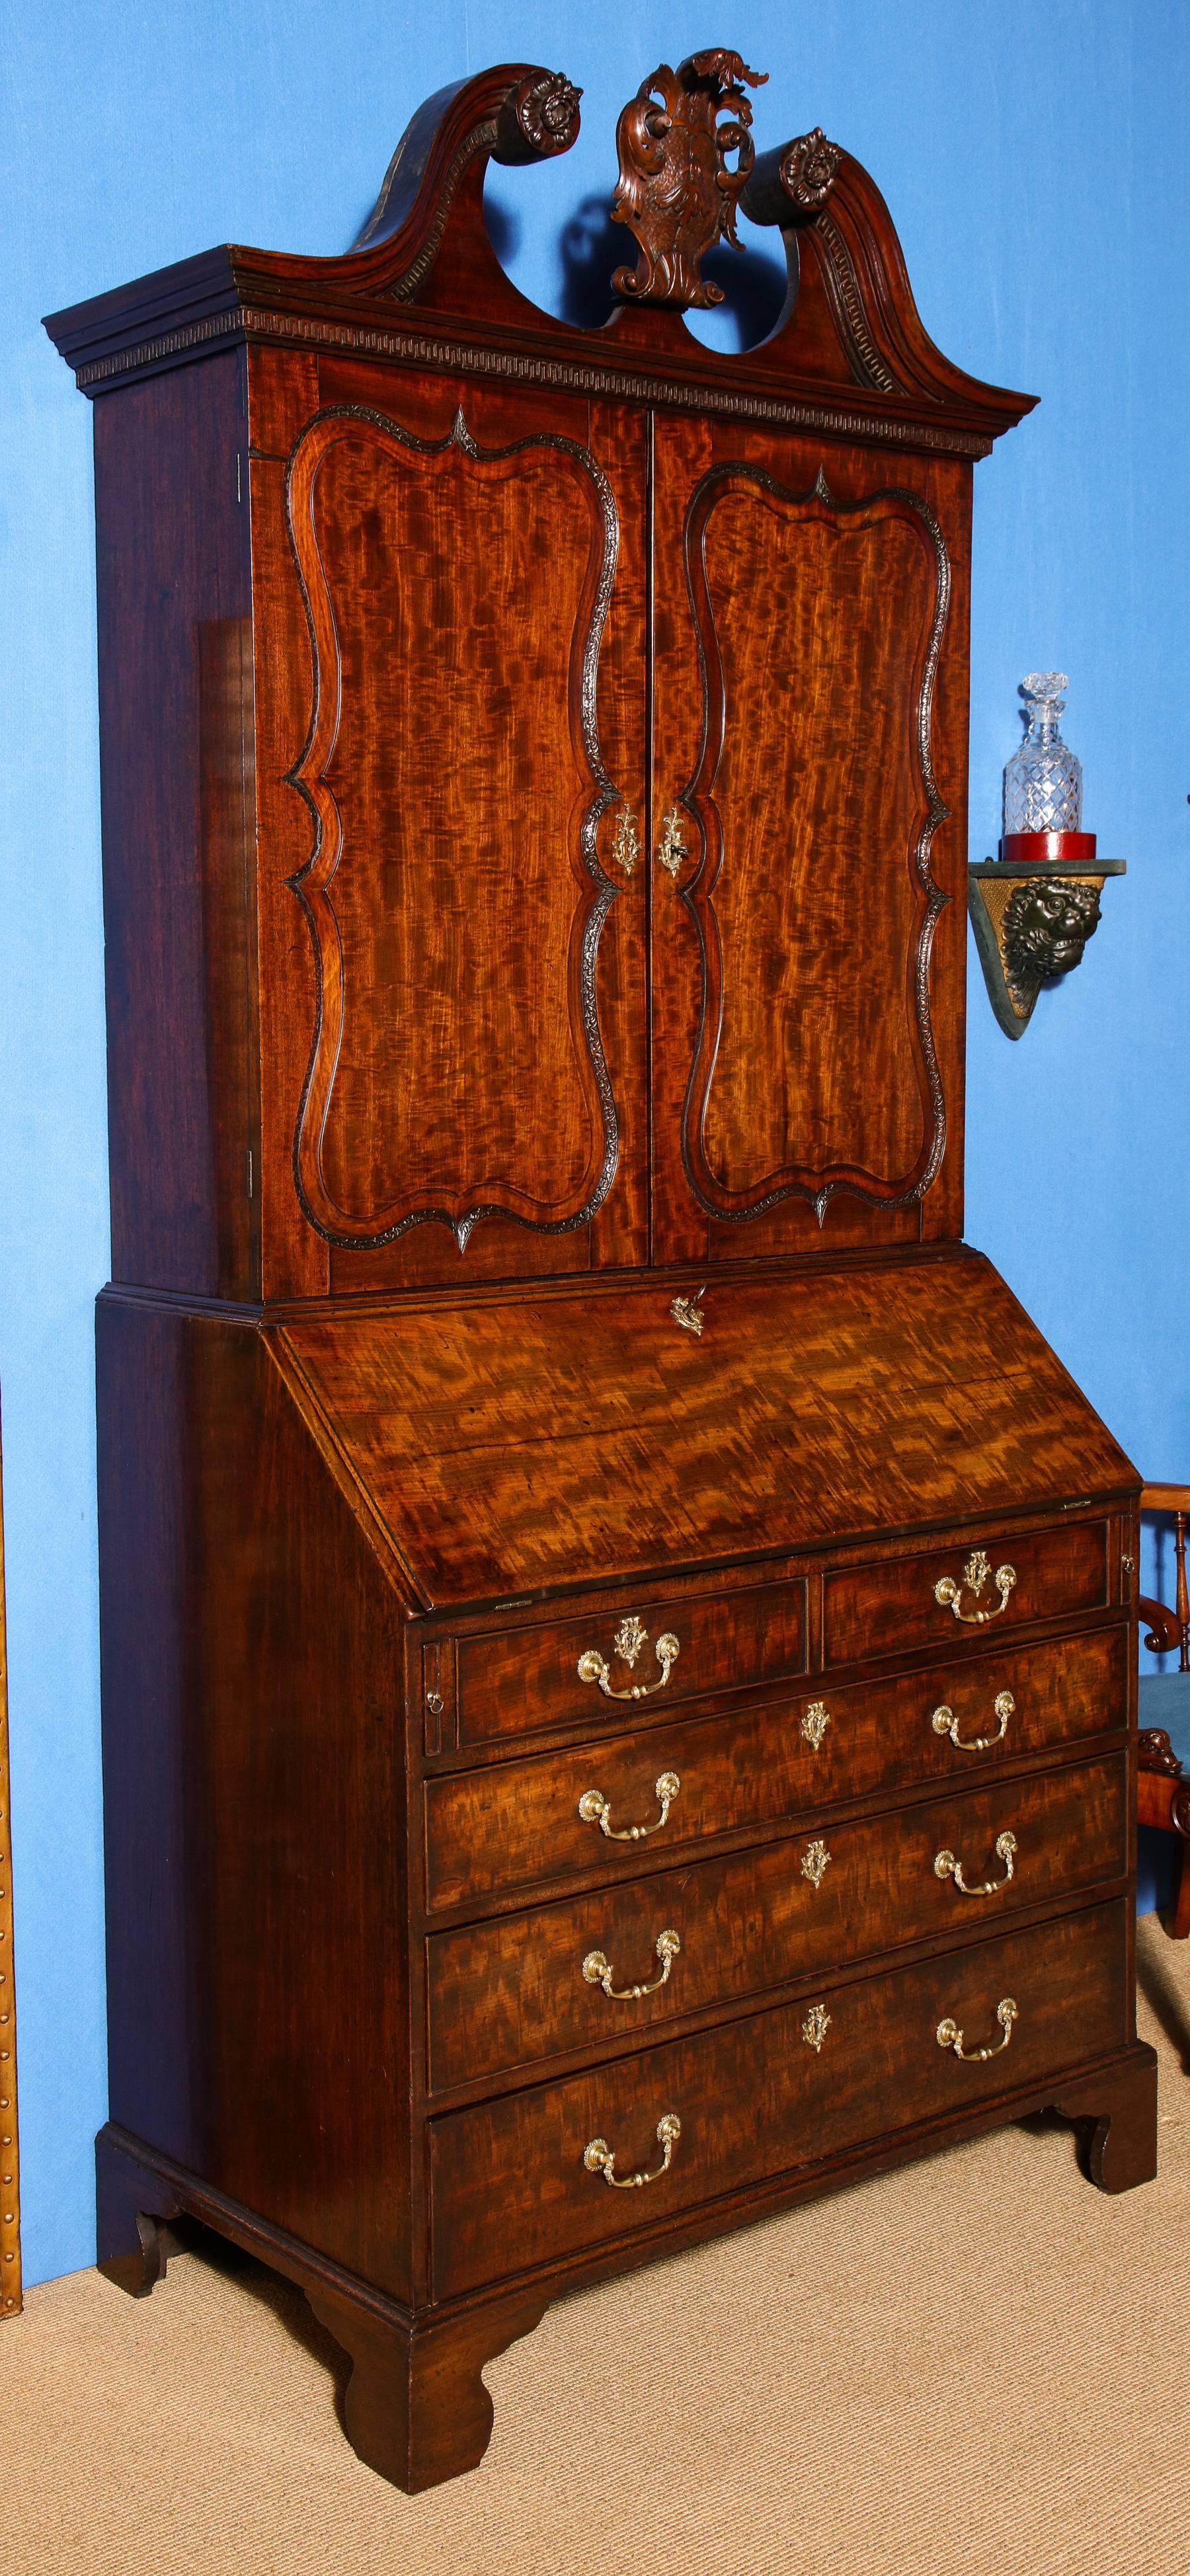 George II mahogany Bureau bookcase attributed to Giles Grendey (London 1693-1780), the upper section with dentil molded swan's neck pediment with flowerhead terminals and centering a foliate and shell carved punchwork cartouche, the molded cornice